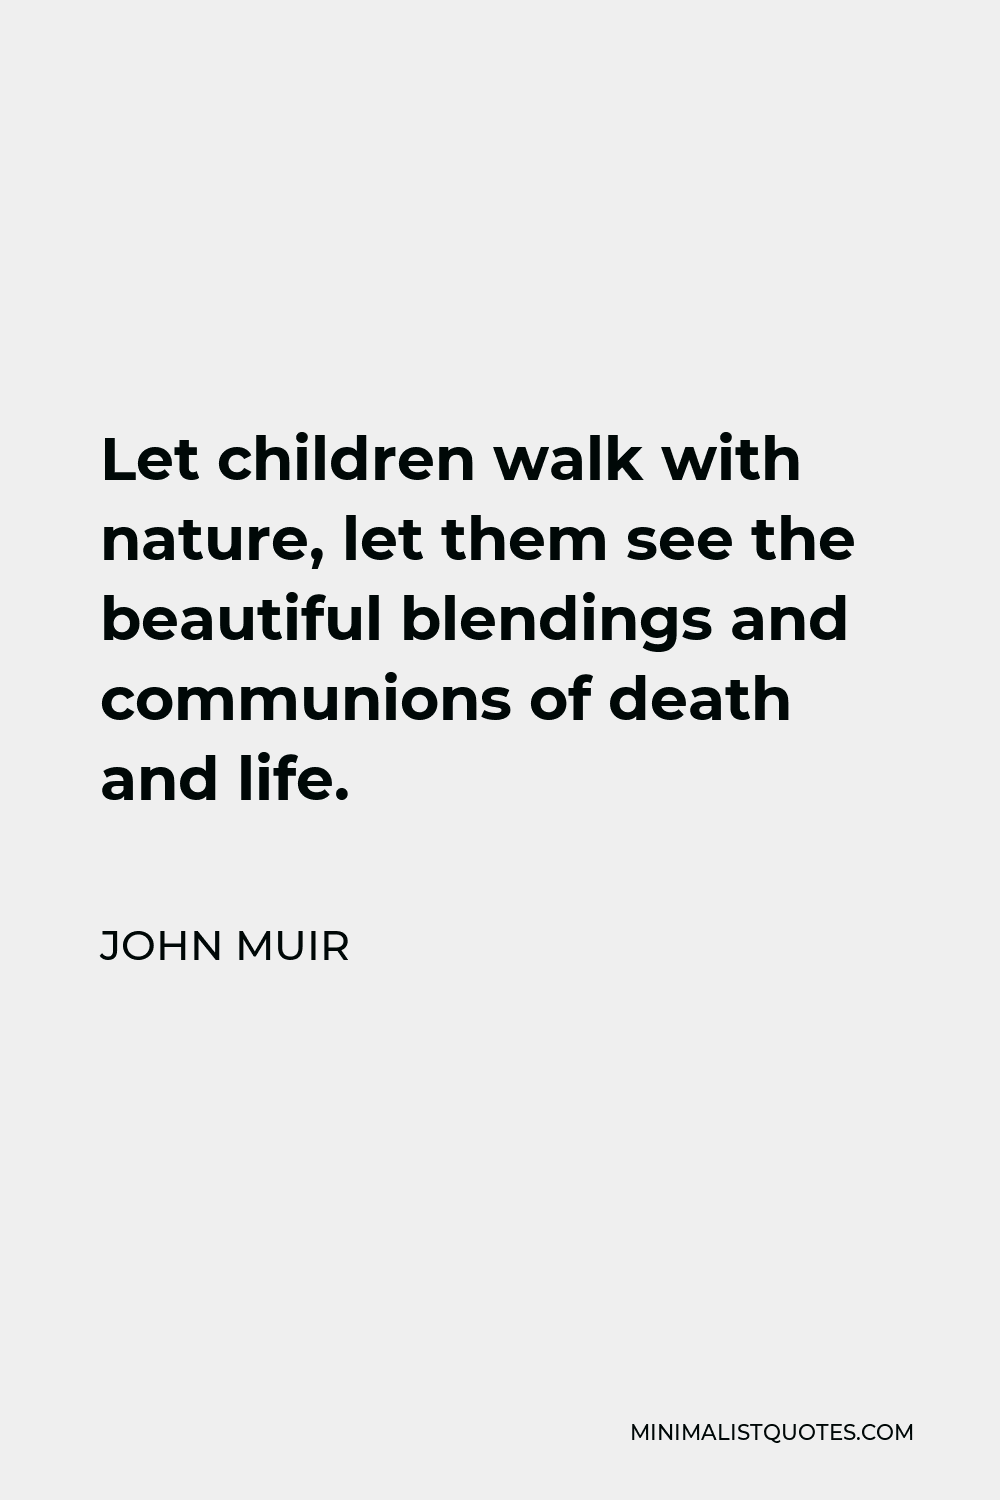 John Muir Quote - Let children walk with nature, let them see the beautiful blendings and communions of death and life.